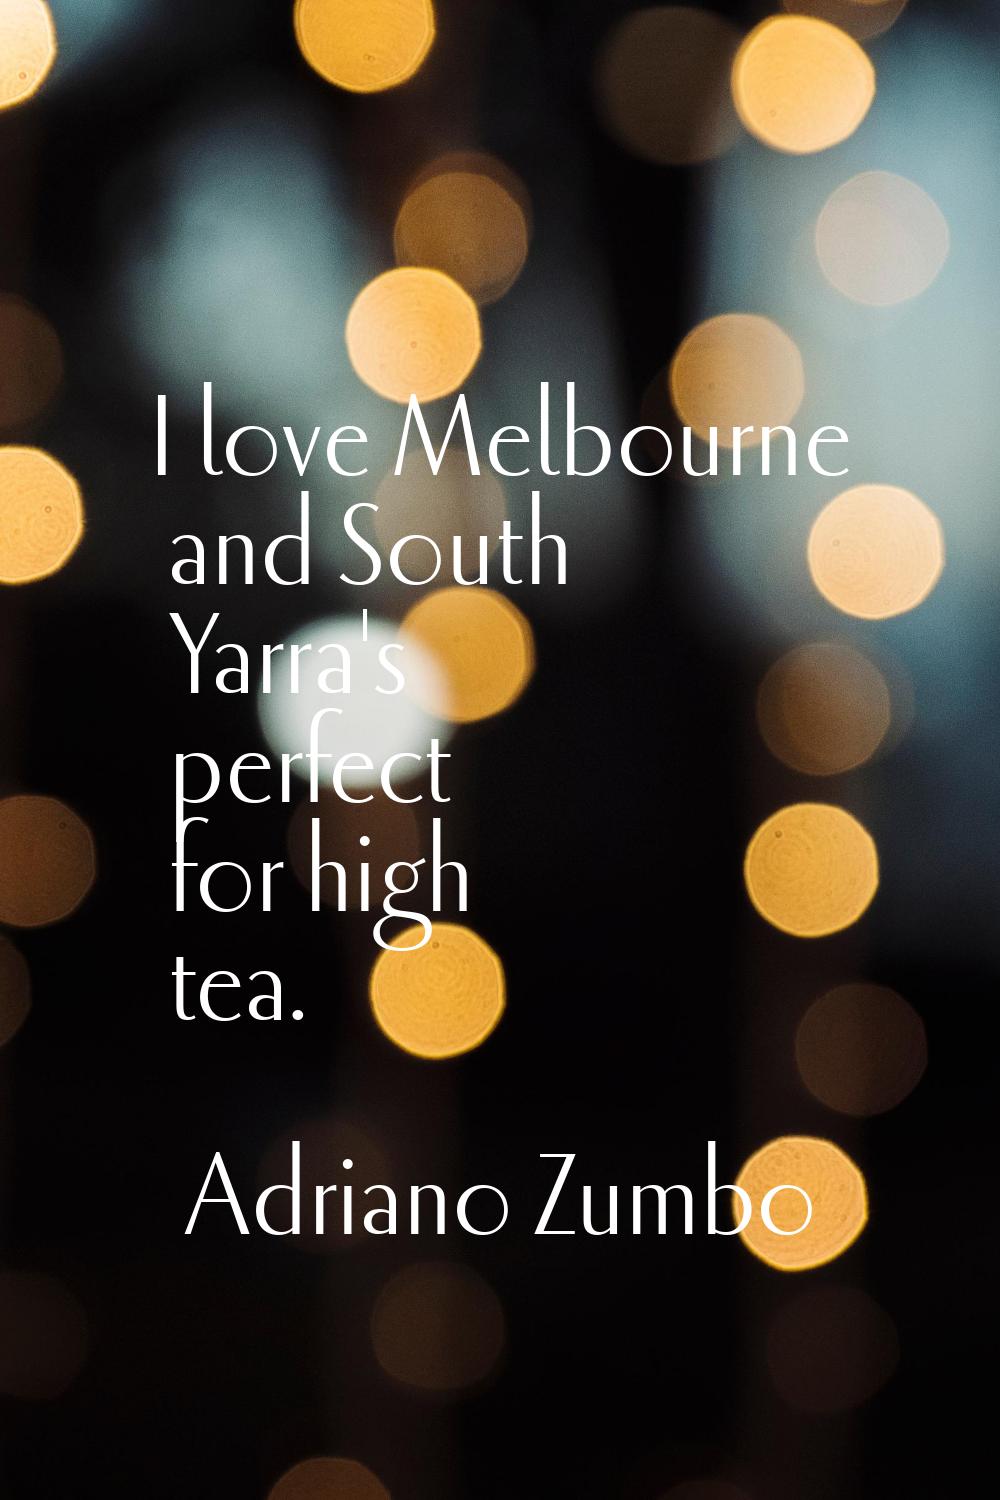 I love Melbourne and South Yarra's perfect for high tea.